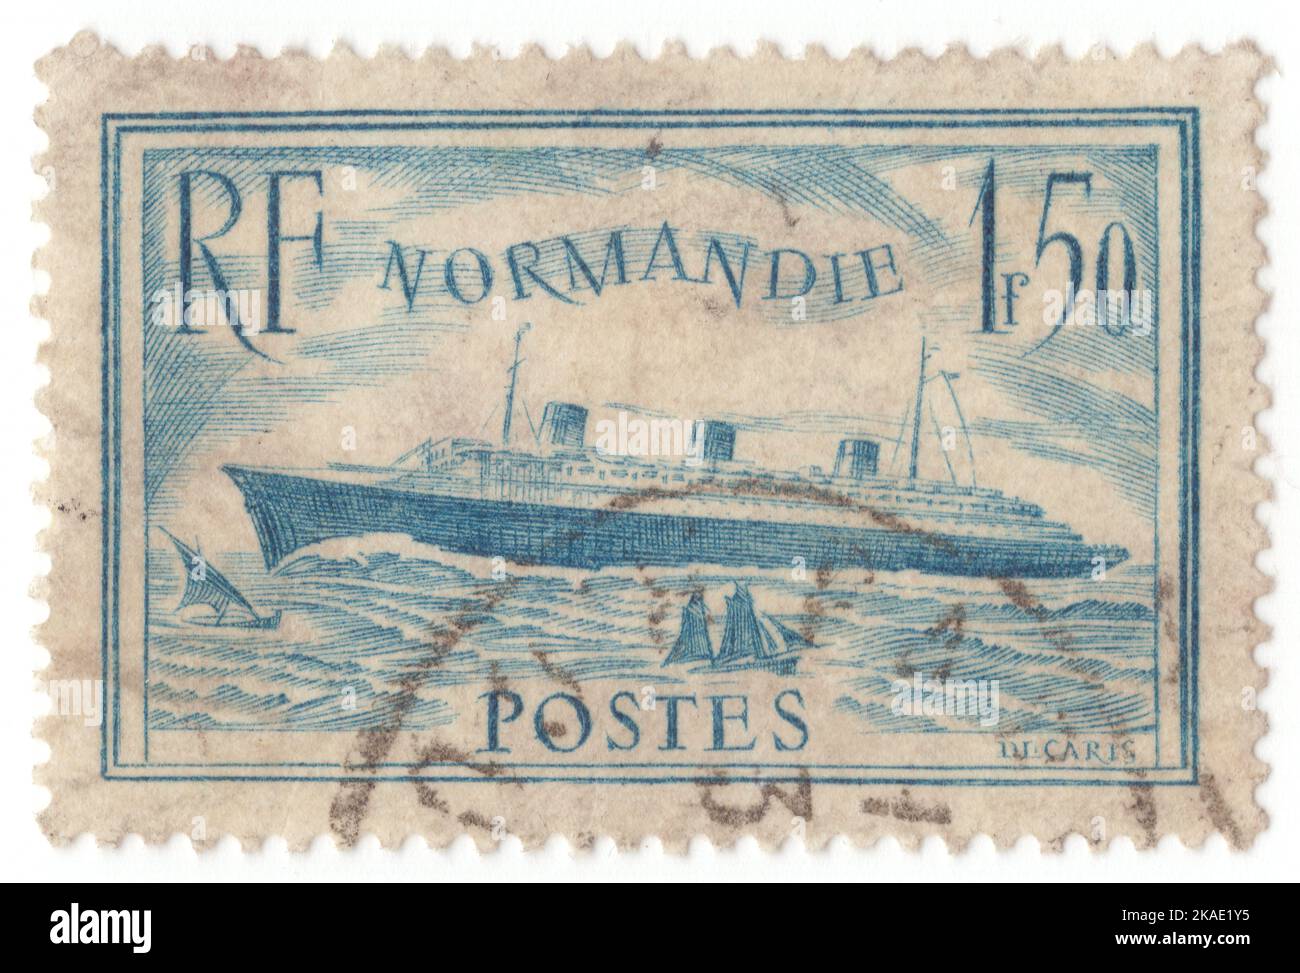 FRANCE - 1936 April: An 1,50 franc blue postage stamp depicting S. S. Normandie. Maiden voyage of the transatlantic steamship, the “Normandie” held the Blue Riband for the fastest transatlantic crossing Stock Photo